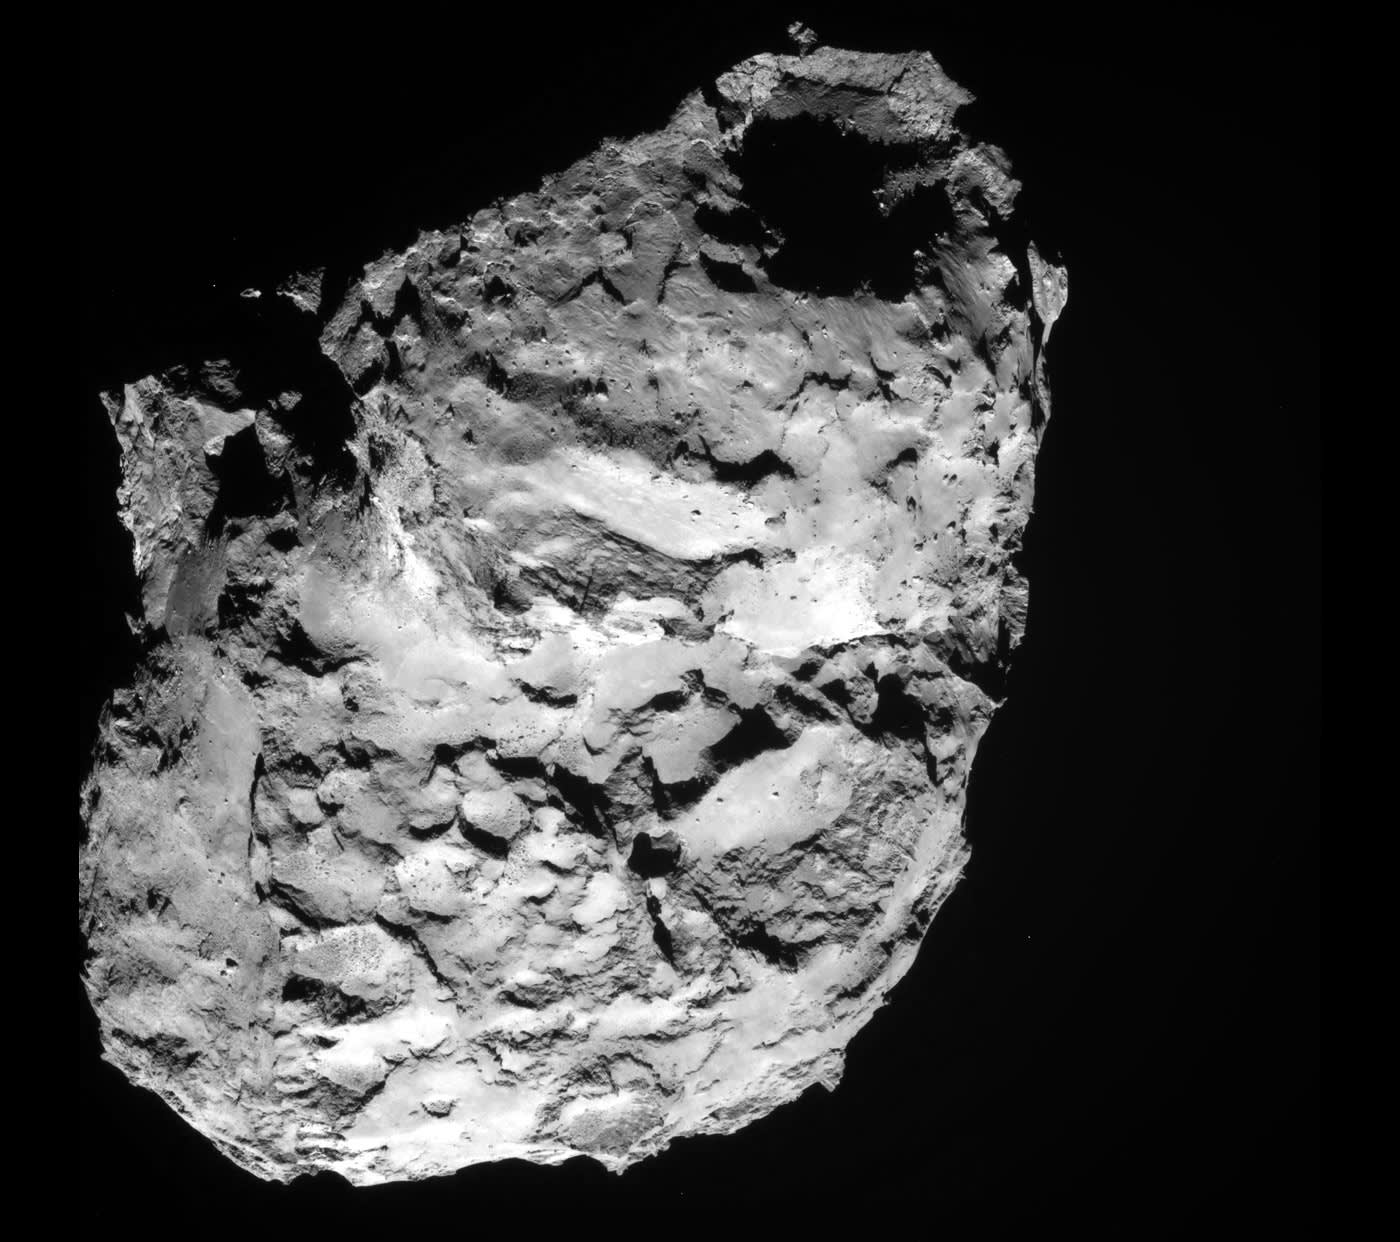 ESA makes an easy-to-view archive of new Rosetta comet images | Engadget